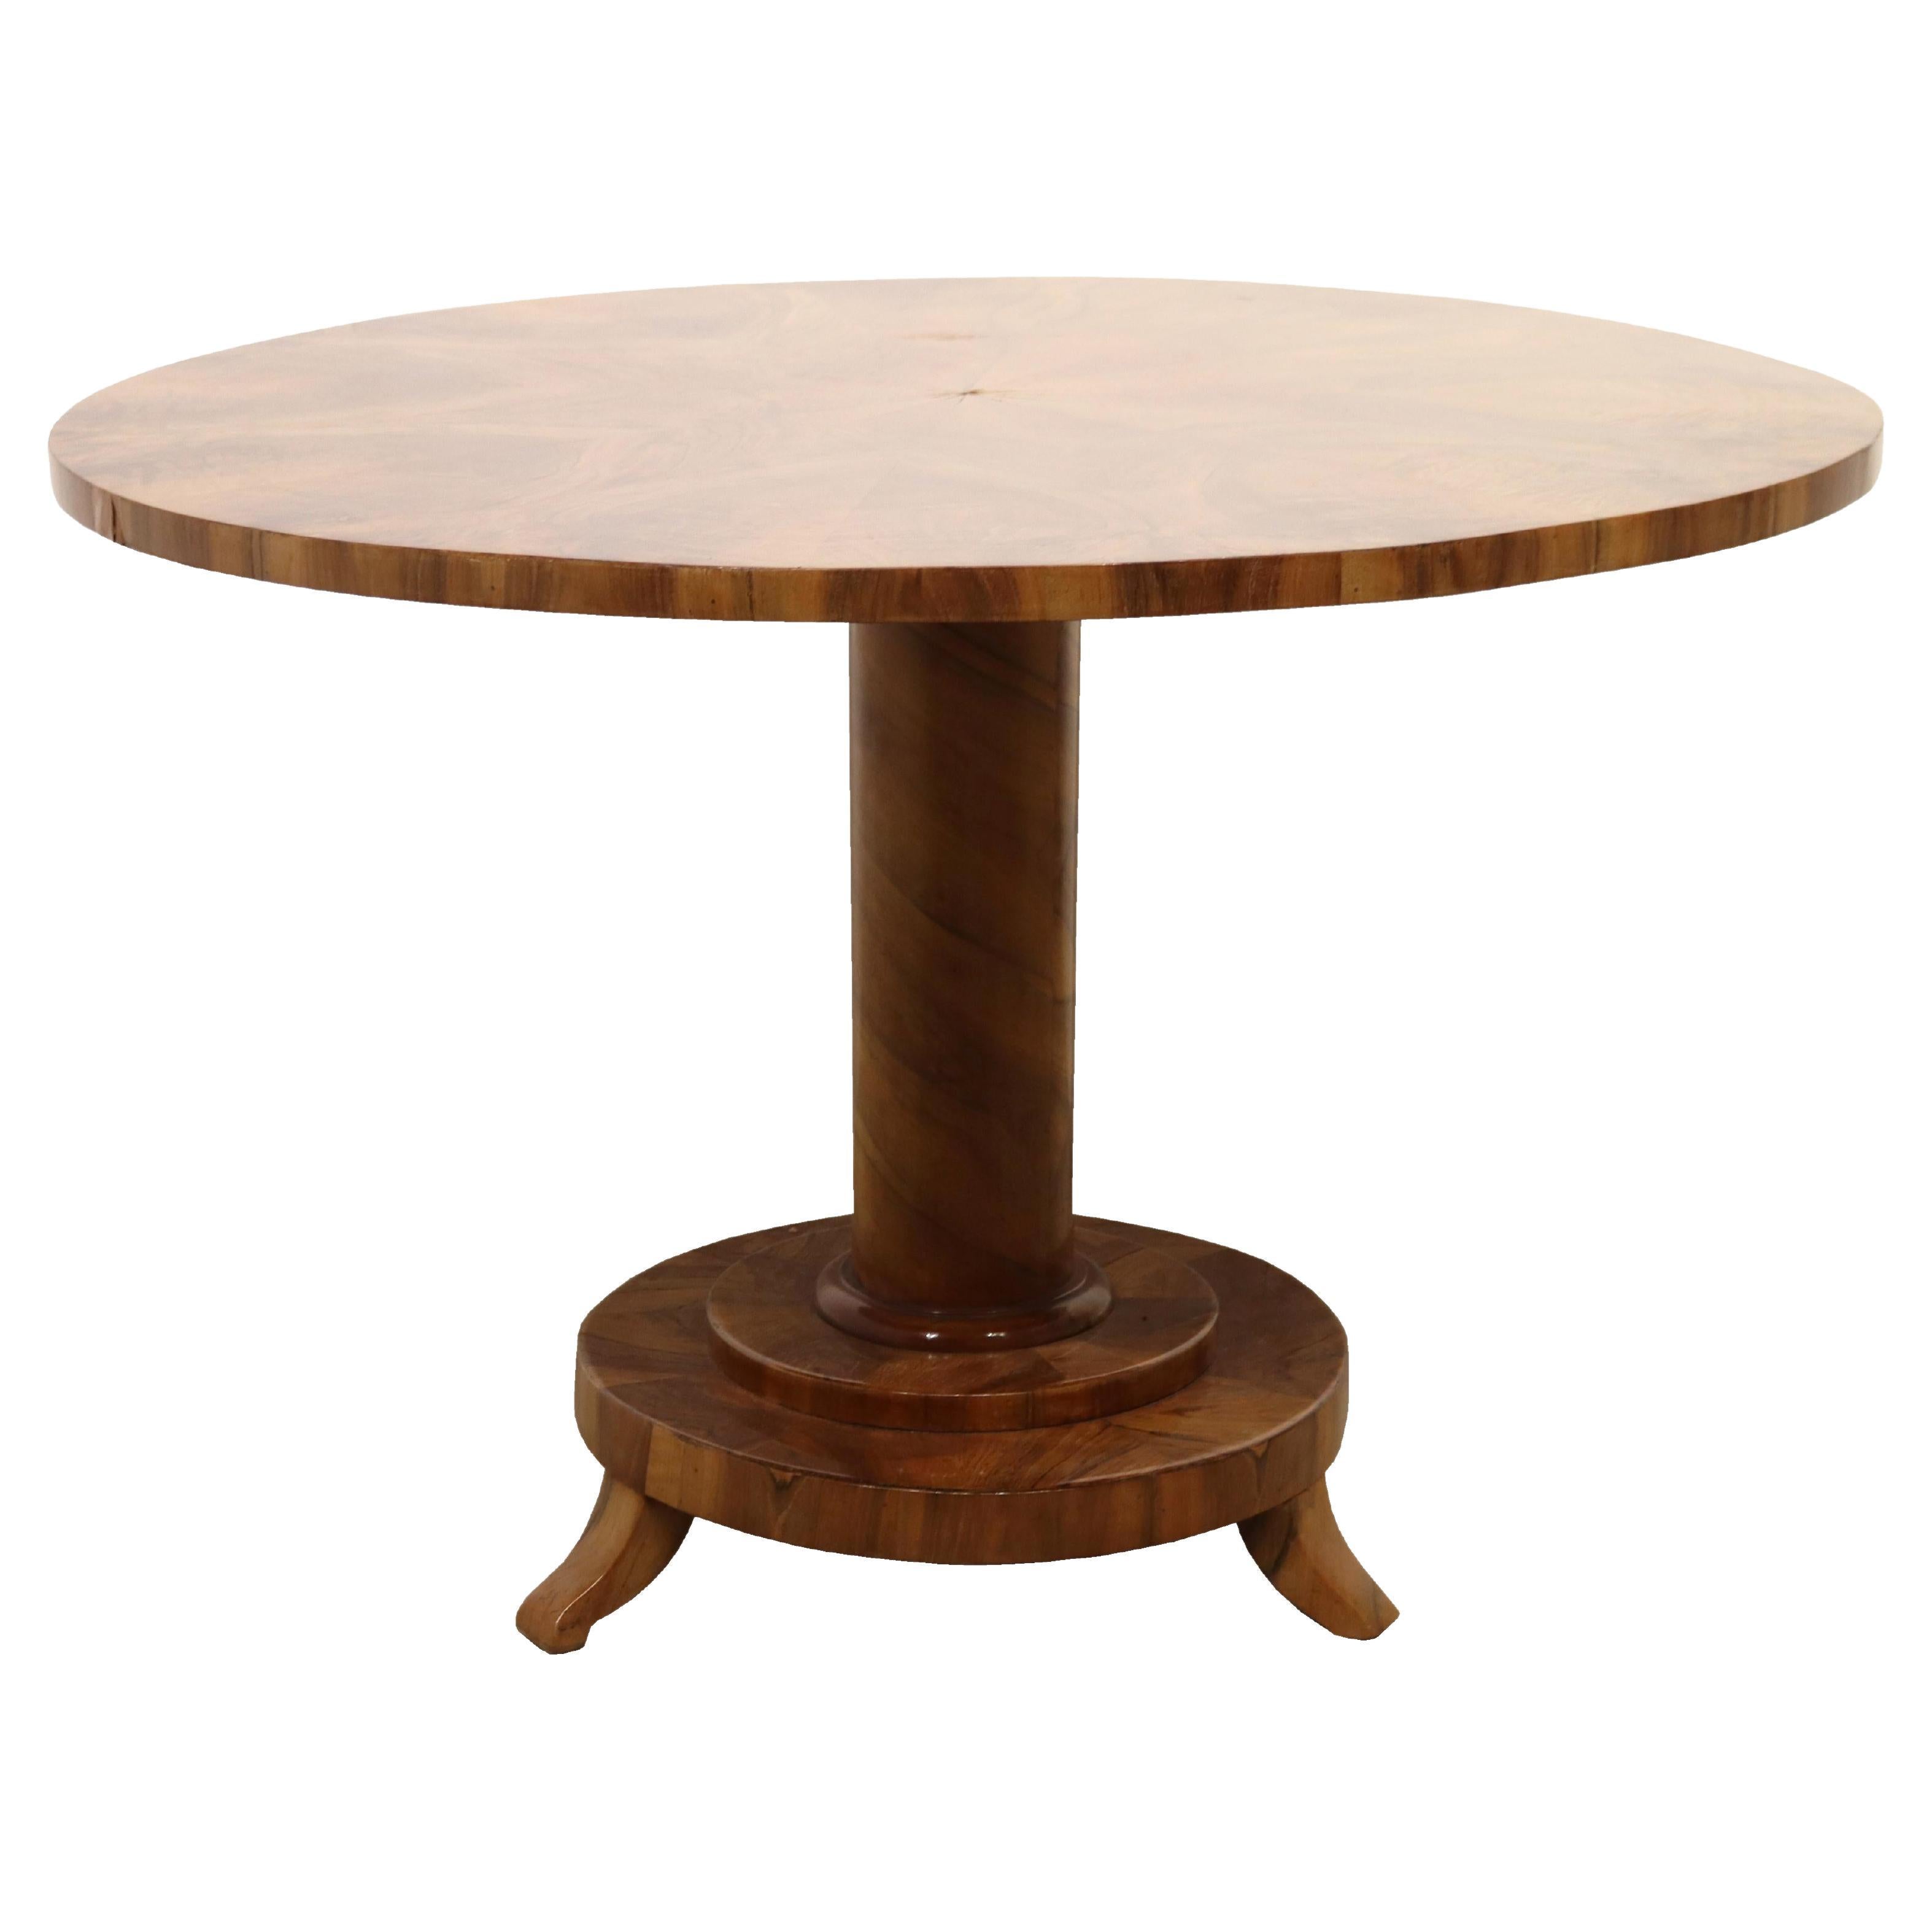 Hello,
This exceptional large Biedermeier salon walnut pedestal table was made in Vienna, c. 1825.

Viennese Biedermeier is distinguished by their sophisticated proportions, rare and refined design and excellent craftsmanship and continue to have a